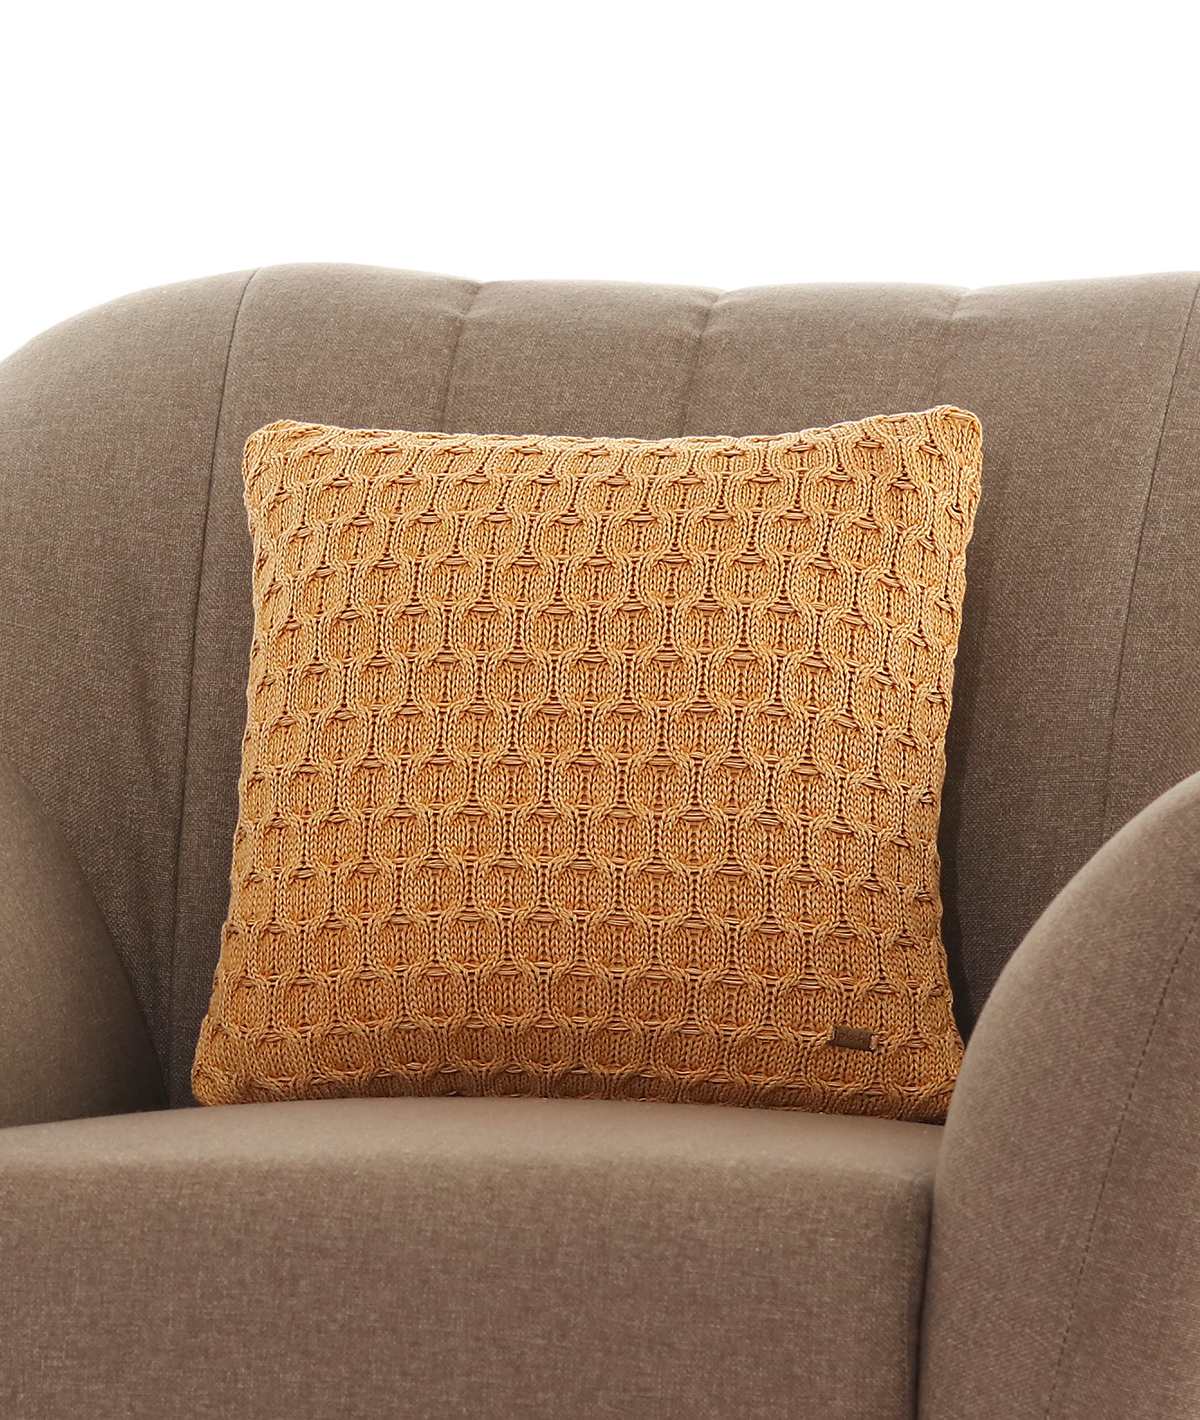 Kelly Knit Cotton Knitted Decorative Mustard Color 16 x 16 Inches Cushion Cover